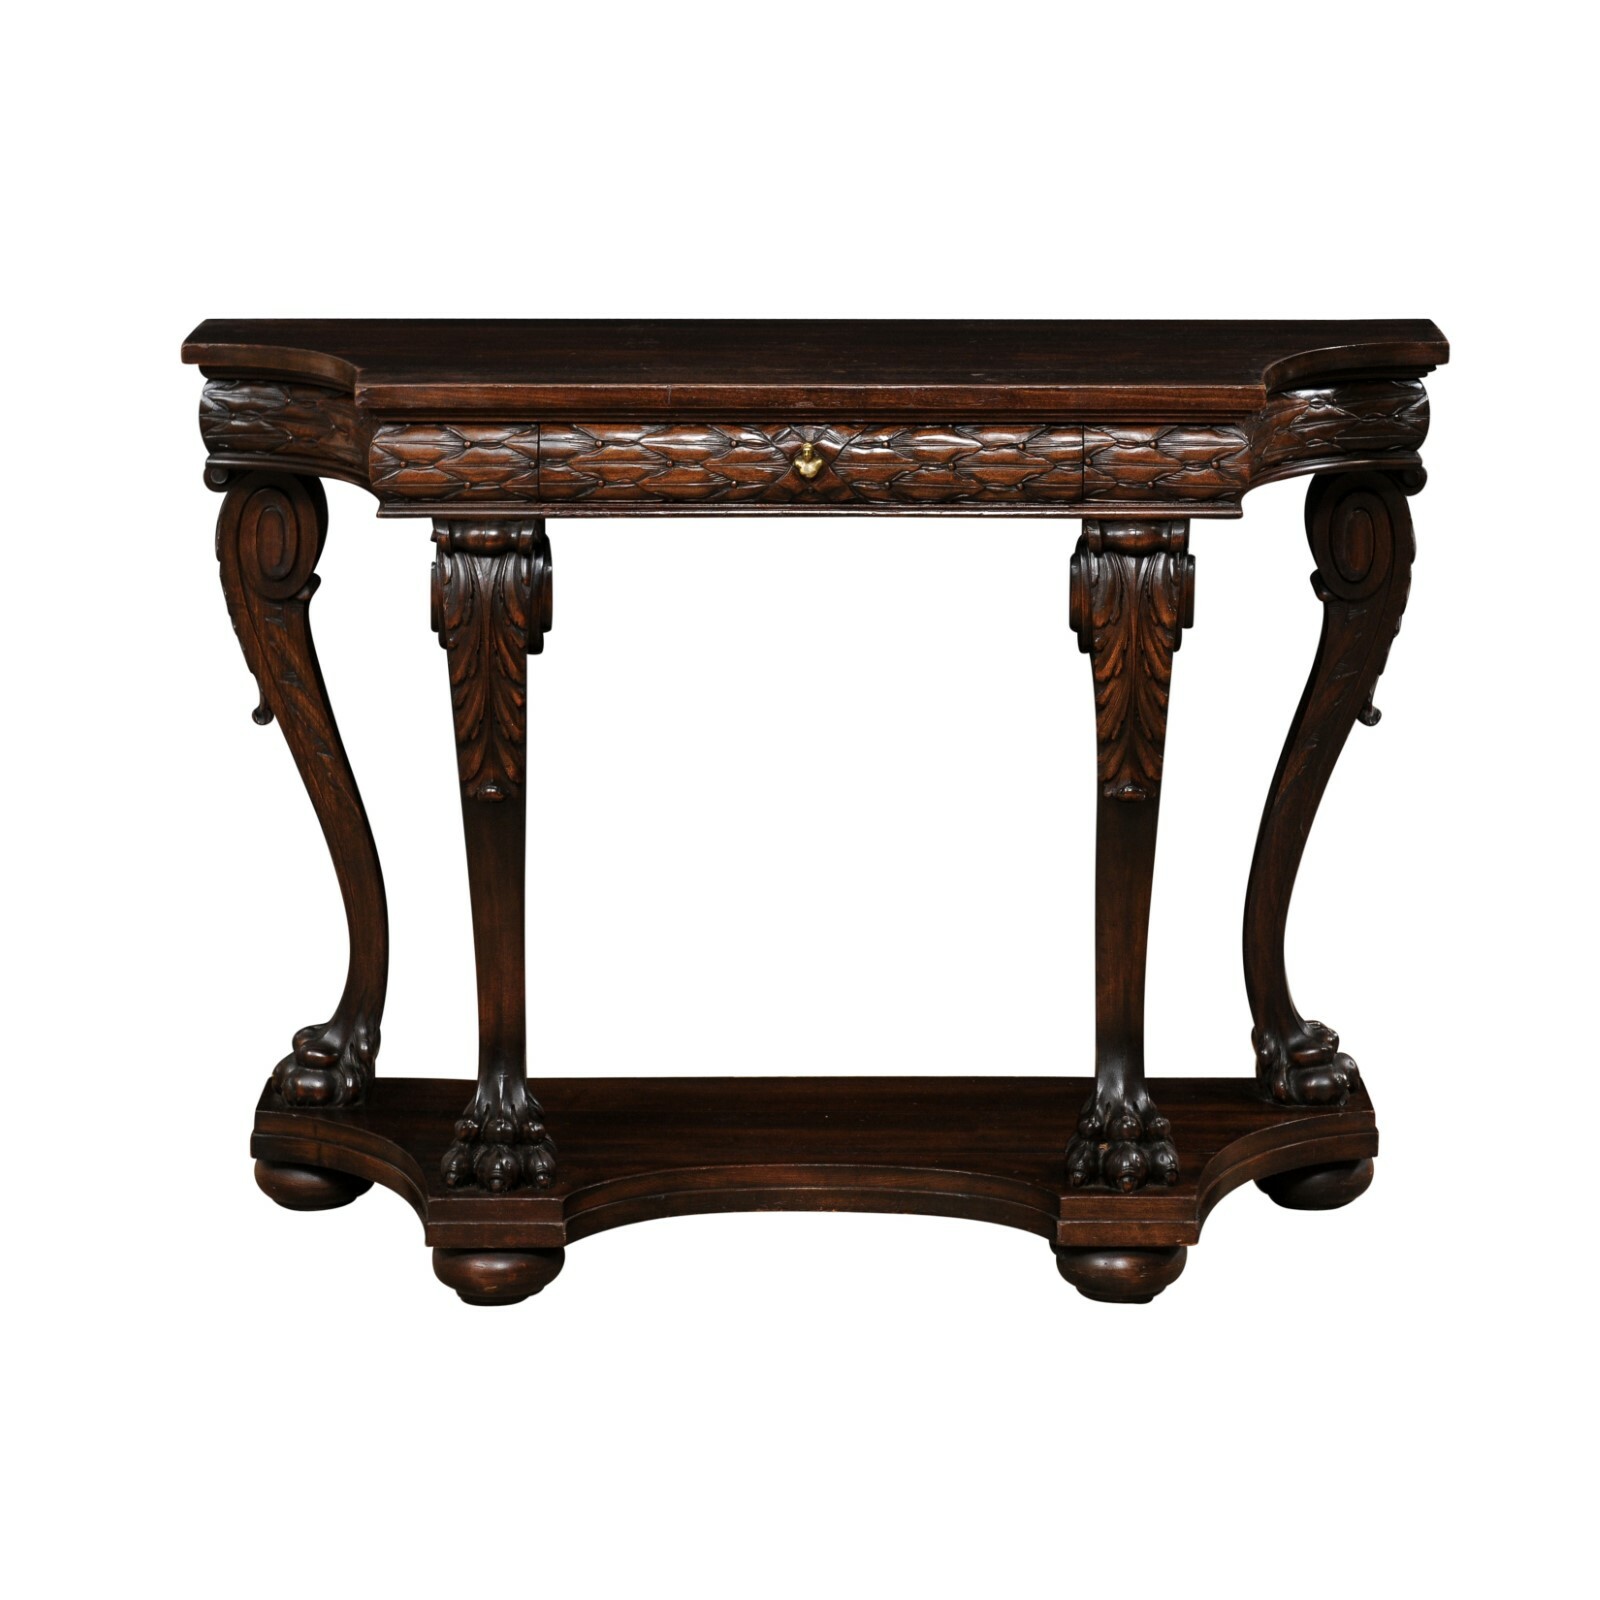 18th C. Italian Carved Walnut Console Table